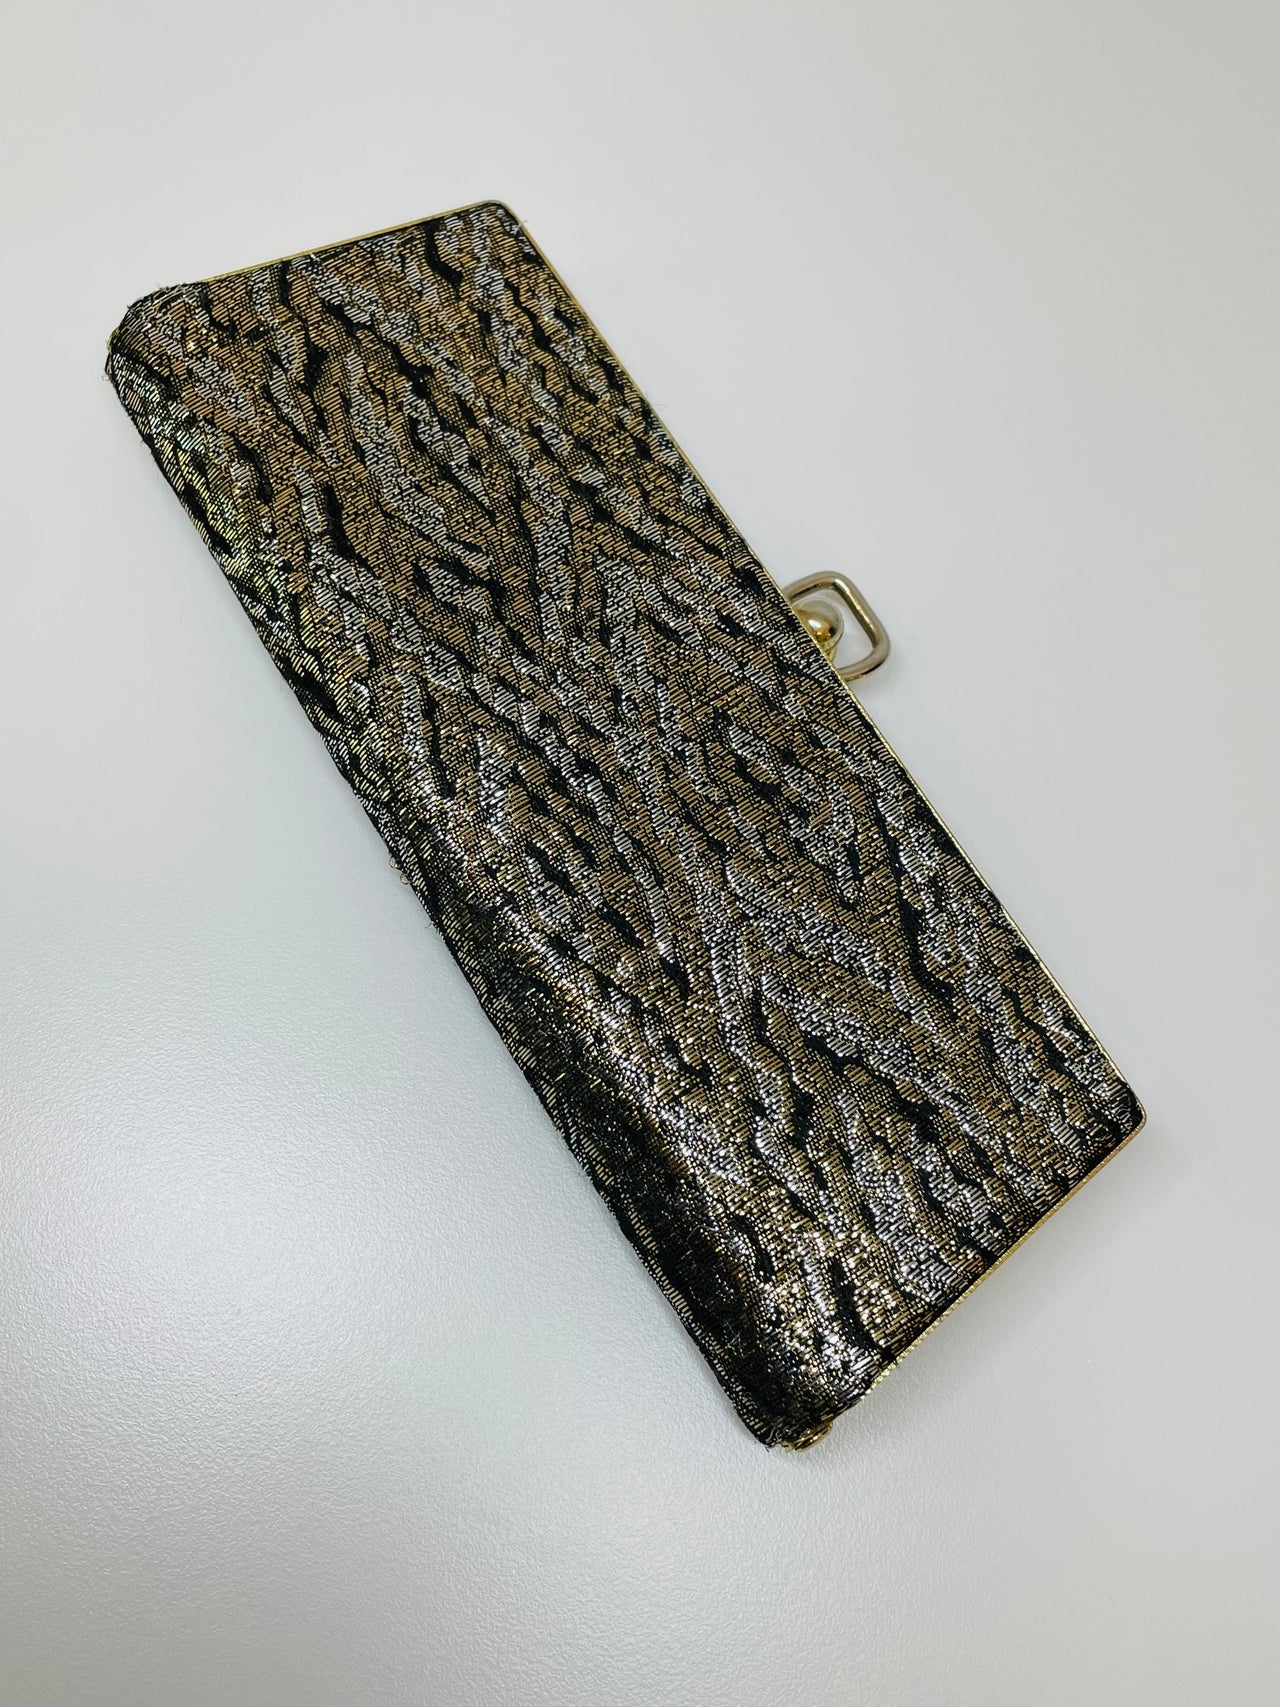 Black, Gold, and Silver Fabric Case Devil's Details 